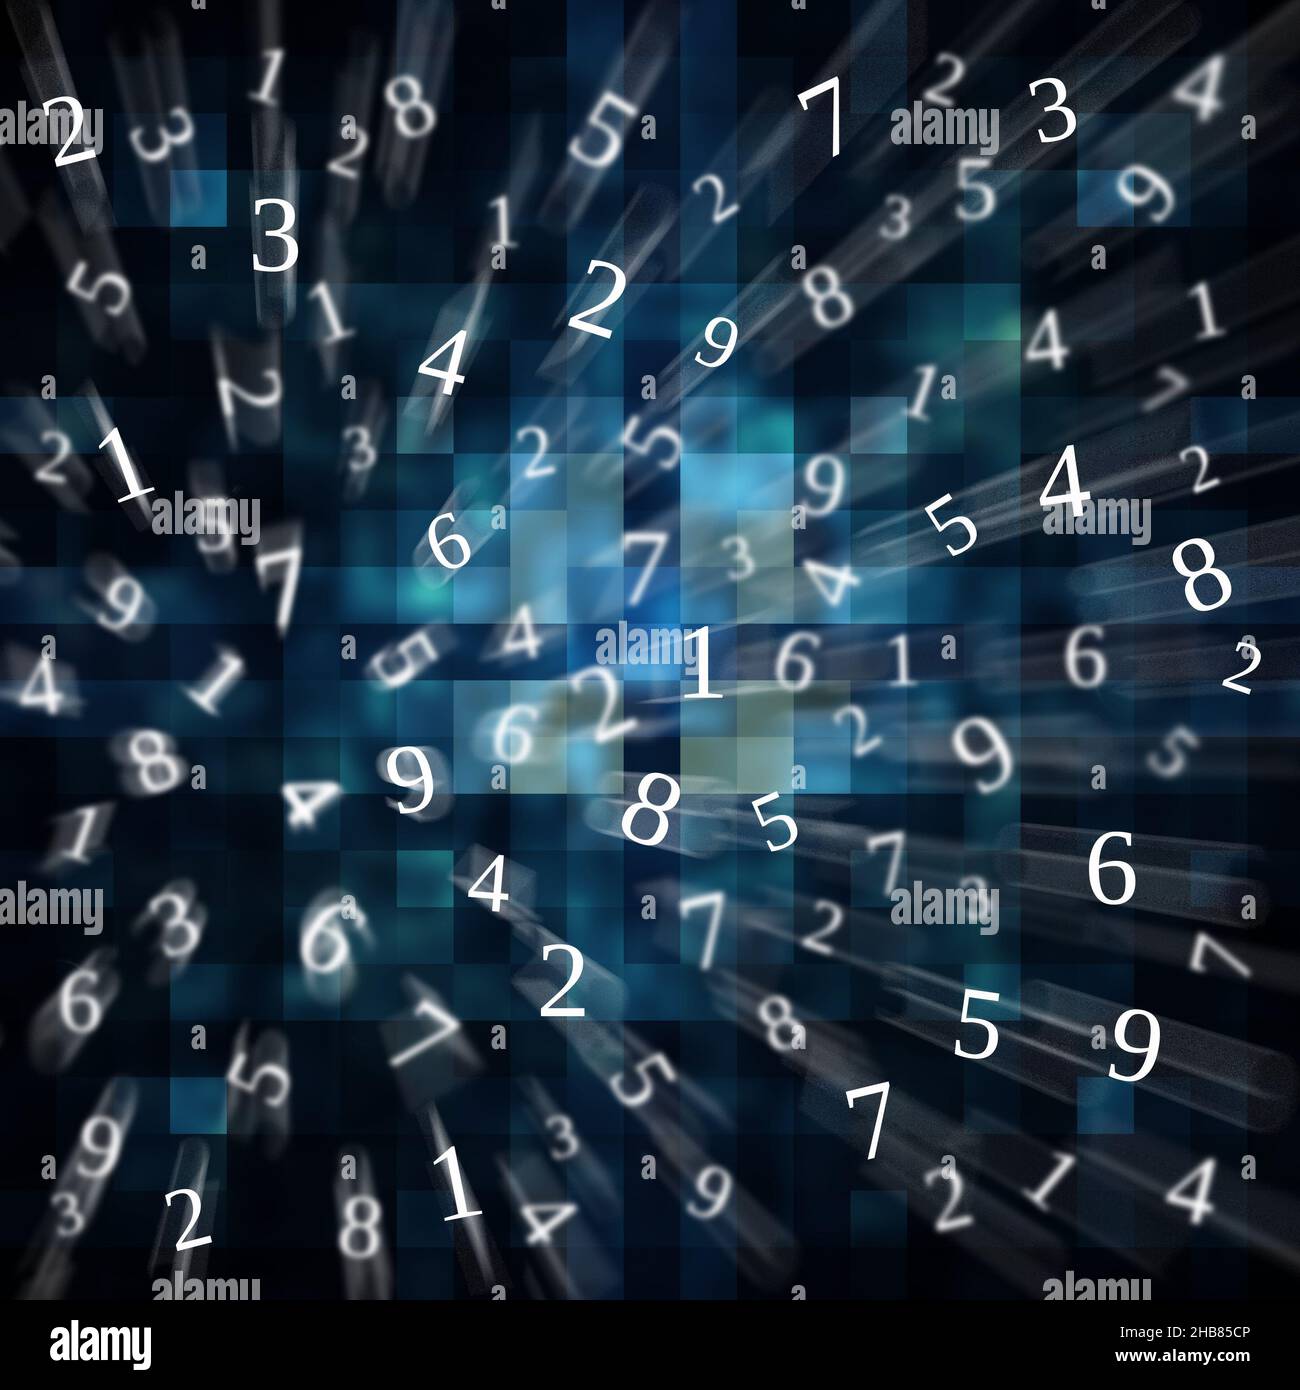 abstract background of numbers, mathematics concept Stock Photo